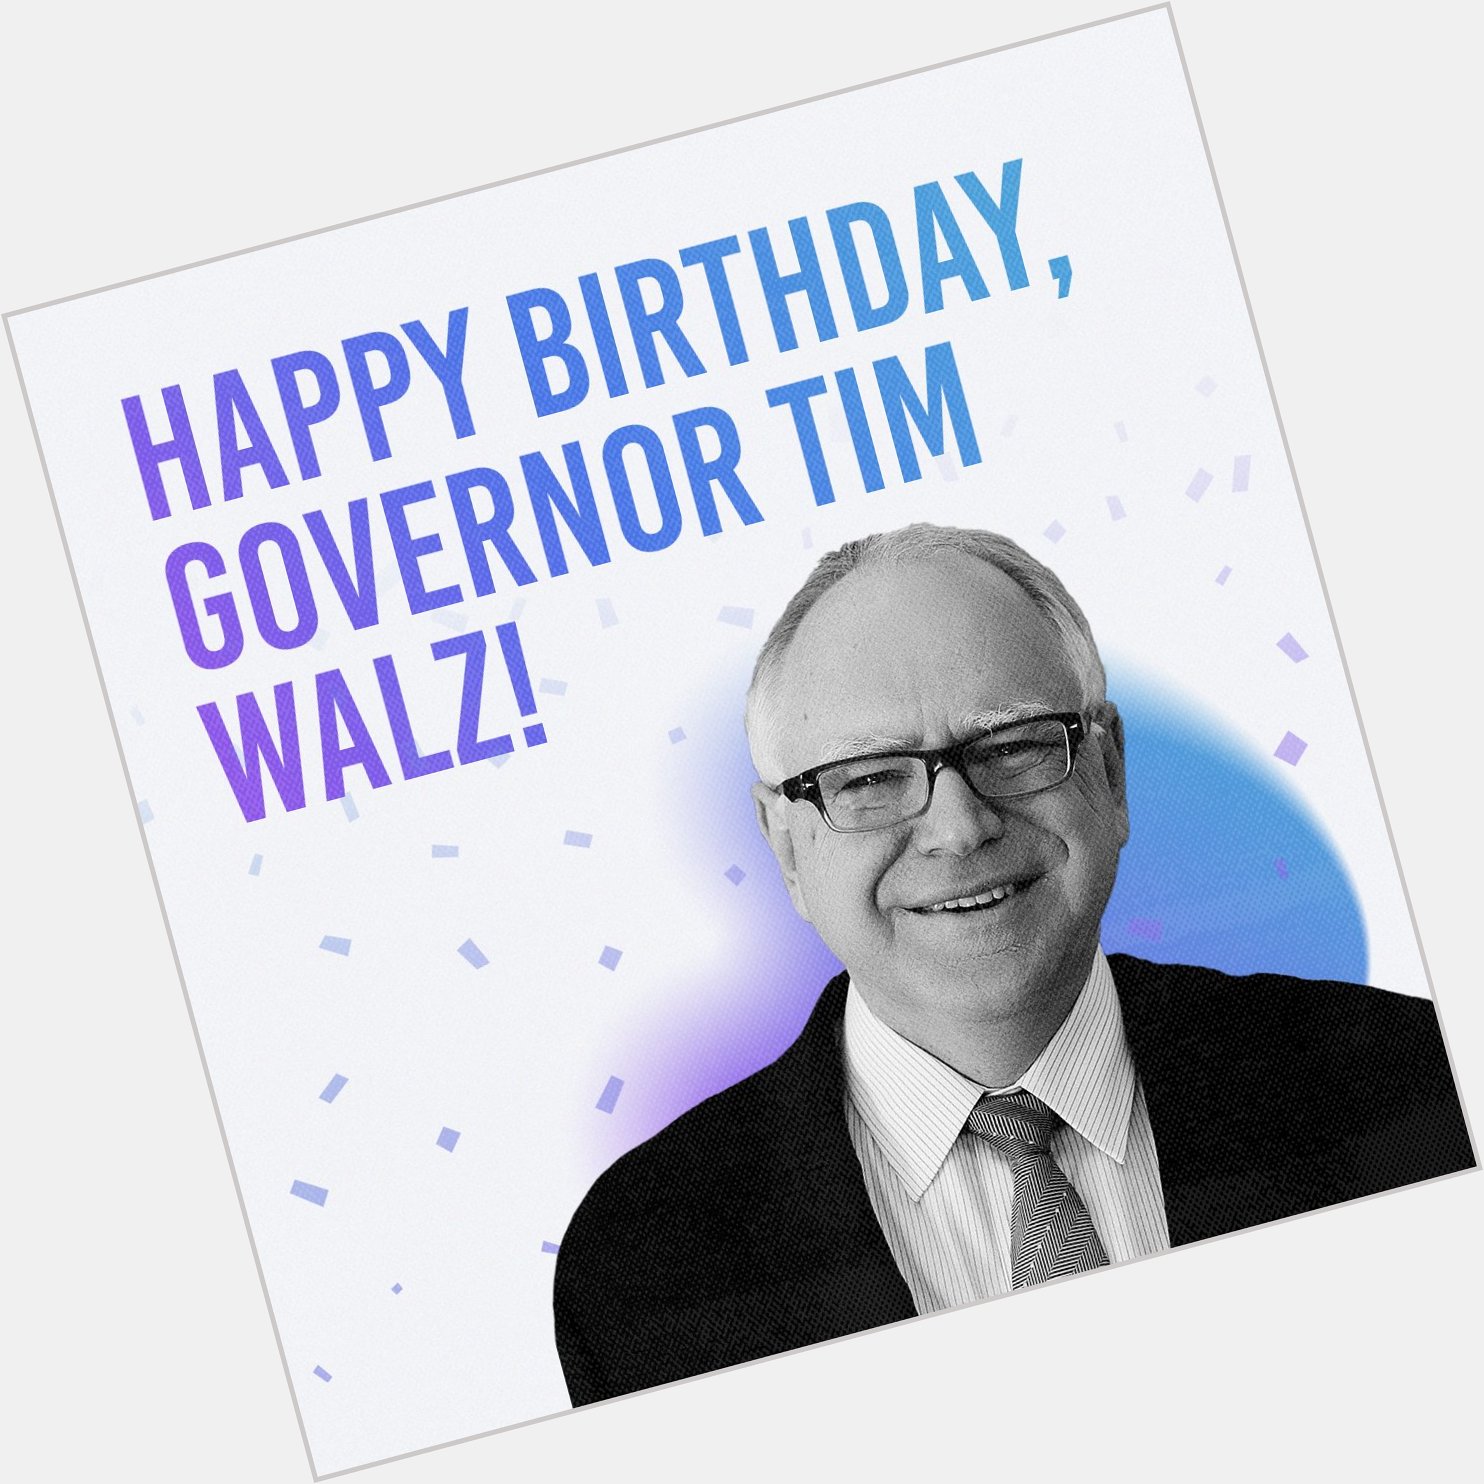 Join us in wishing a happy birthday to Gov. 